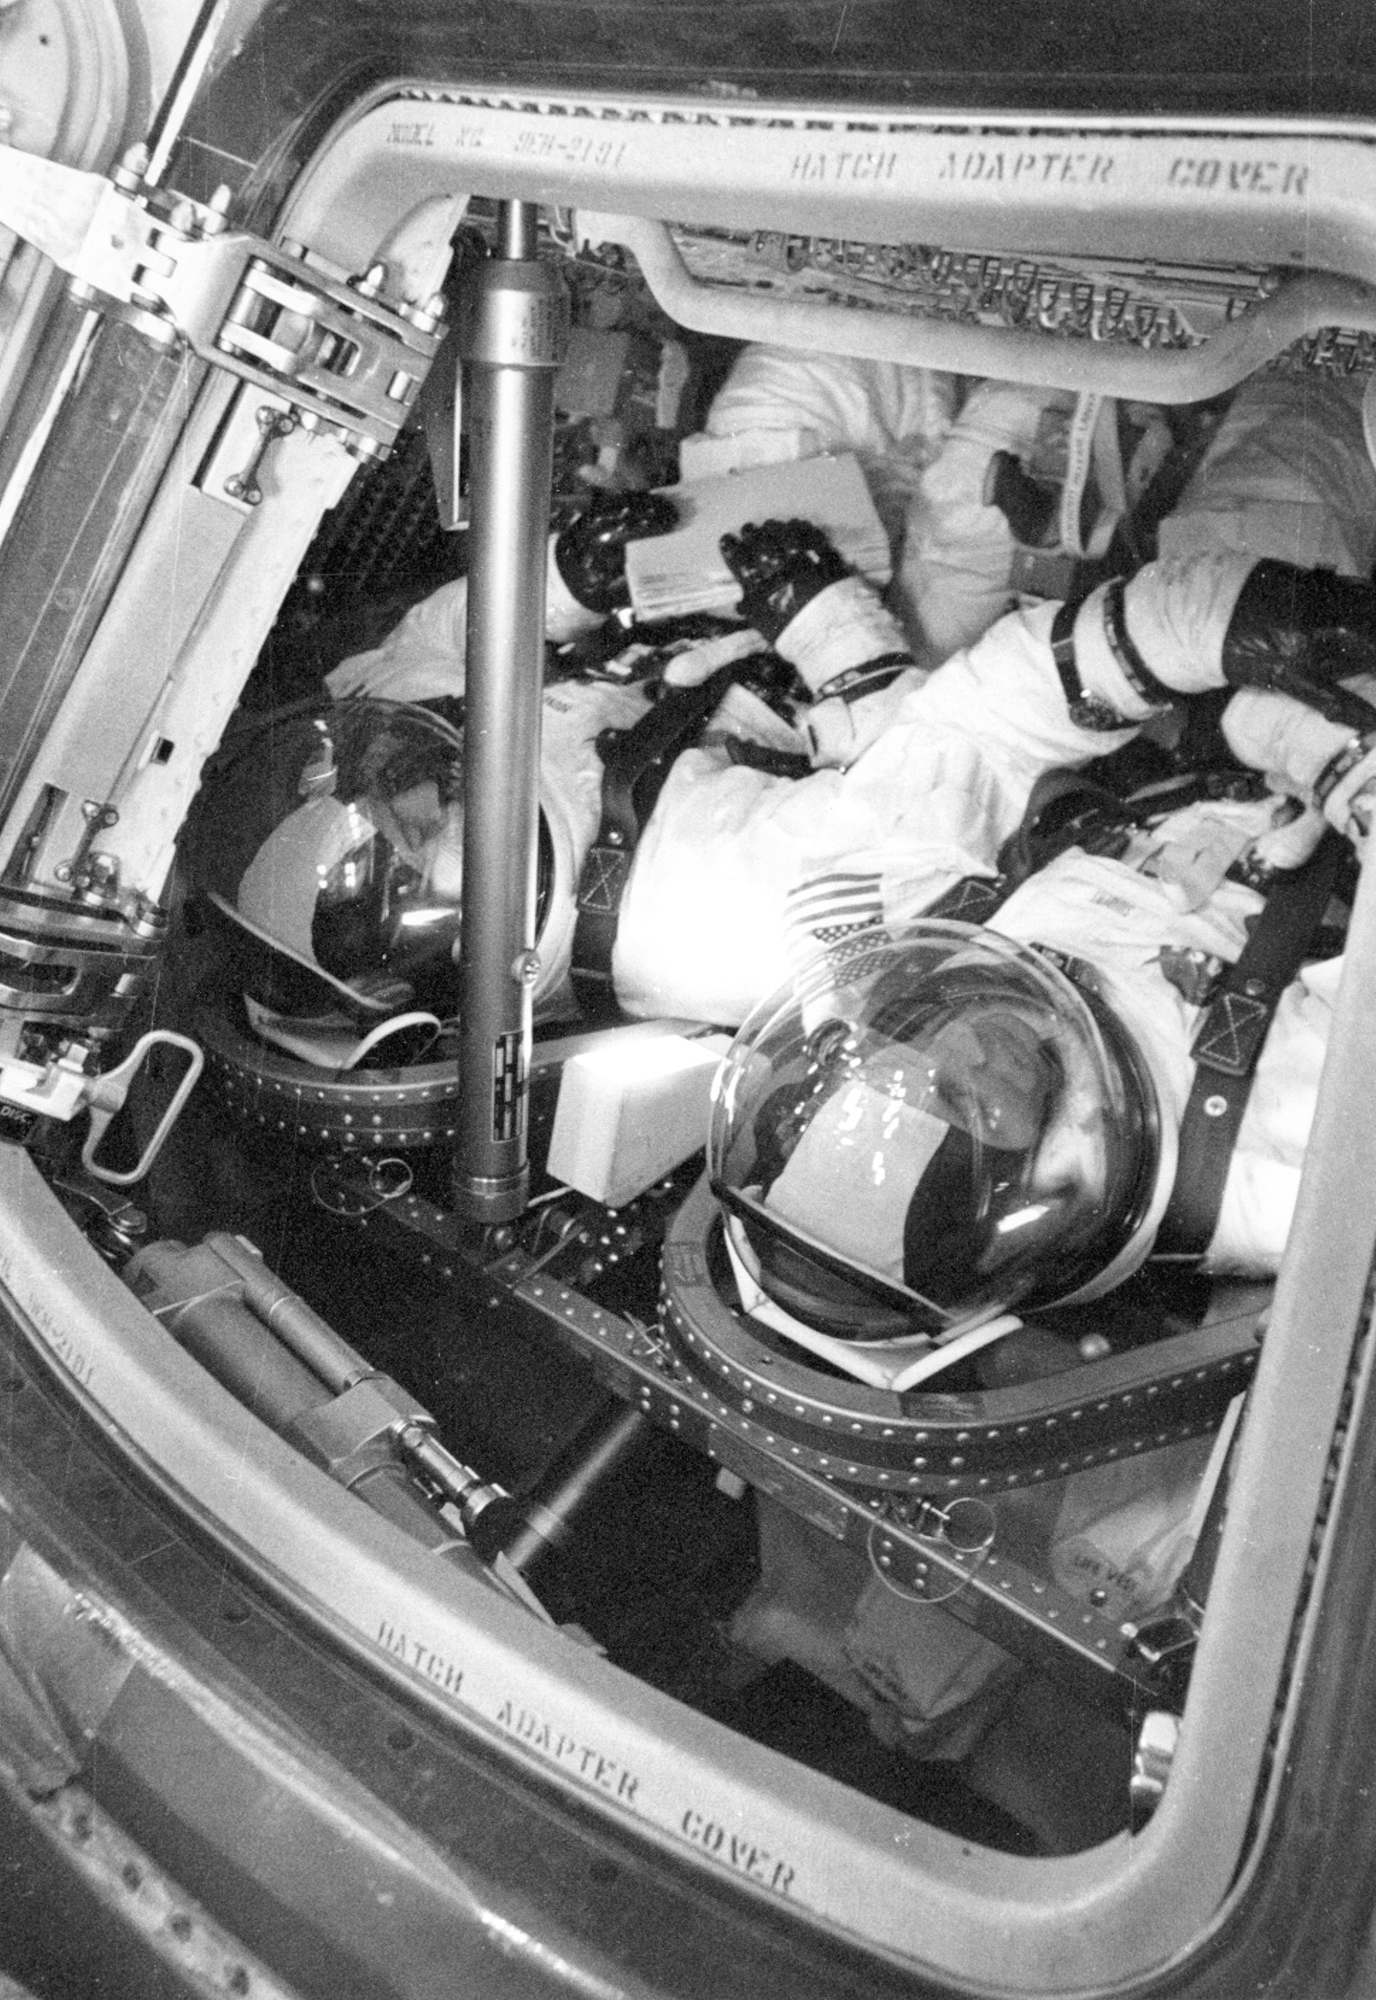 apollo-13-backup-astronauts-john-young-and-jack-swigert-in-spacecraft-during-altitude-chamber-test-at-ksc.-september-1969.jpg